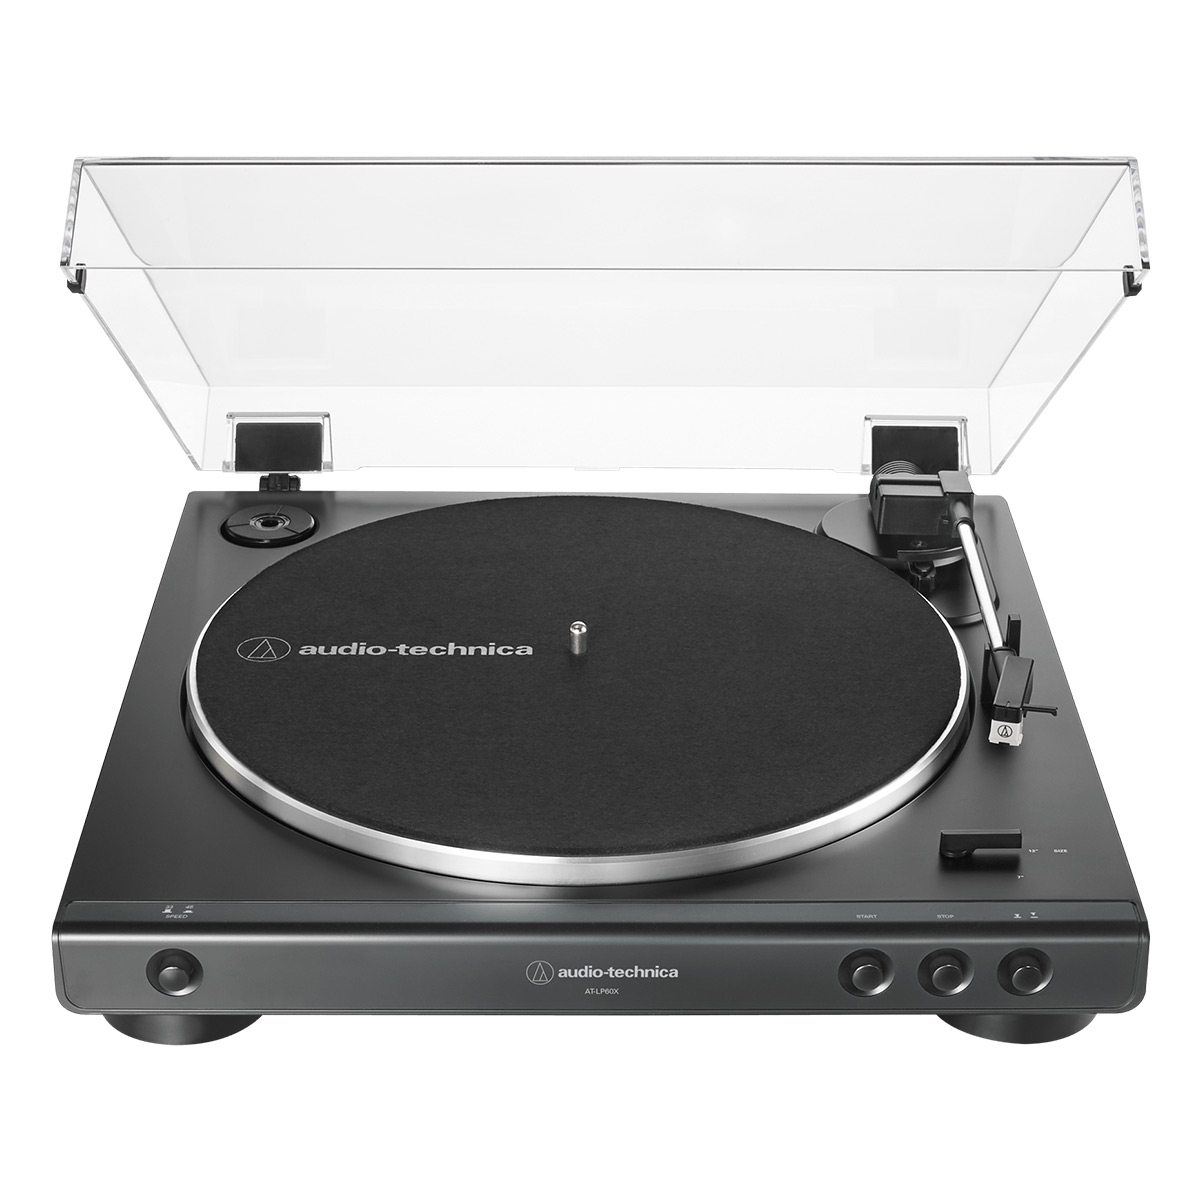 Audio-Technica AT-LP60X Fully Automatic Belt-Drive Stereo Turntable (Black) - image 1 of 4